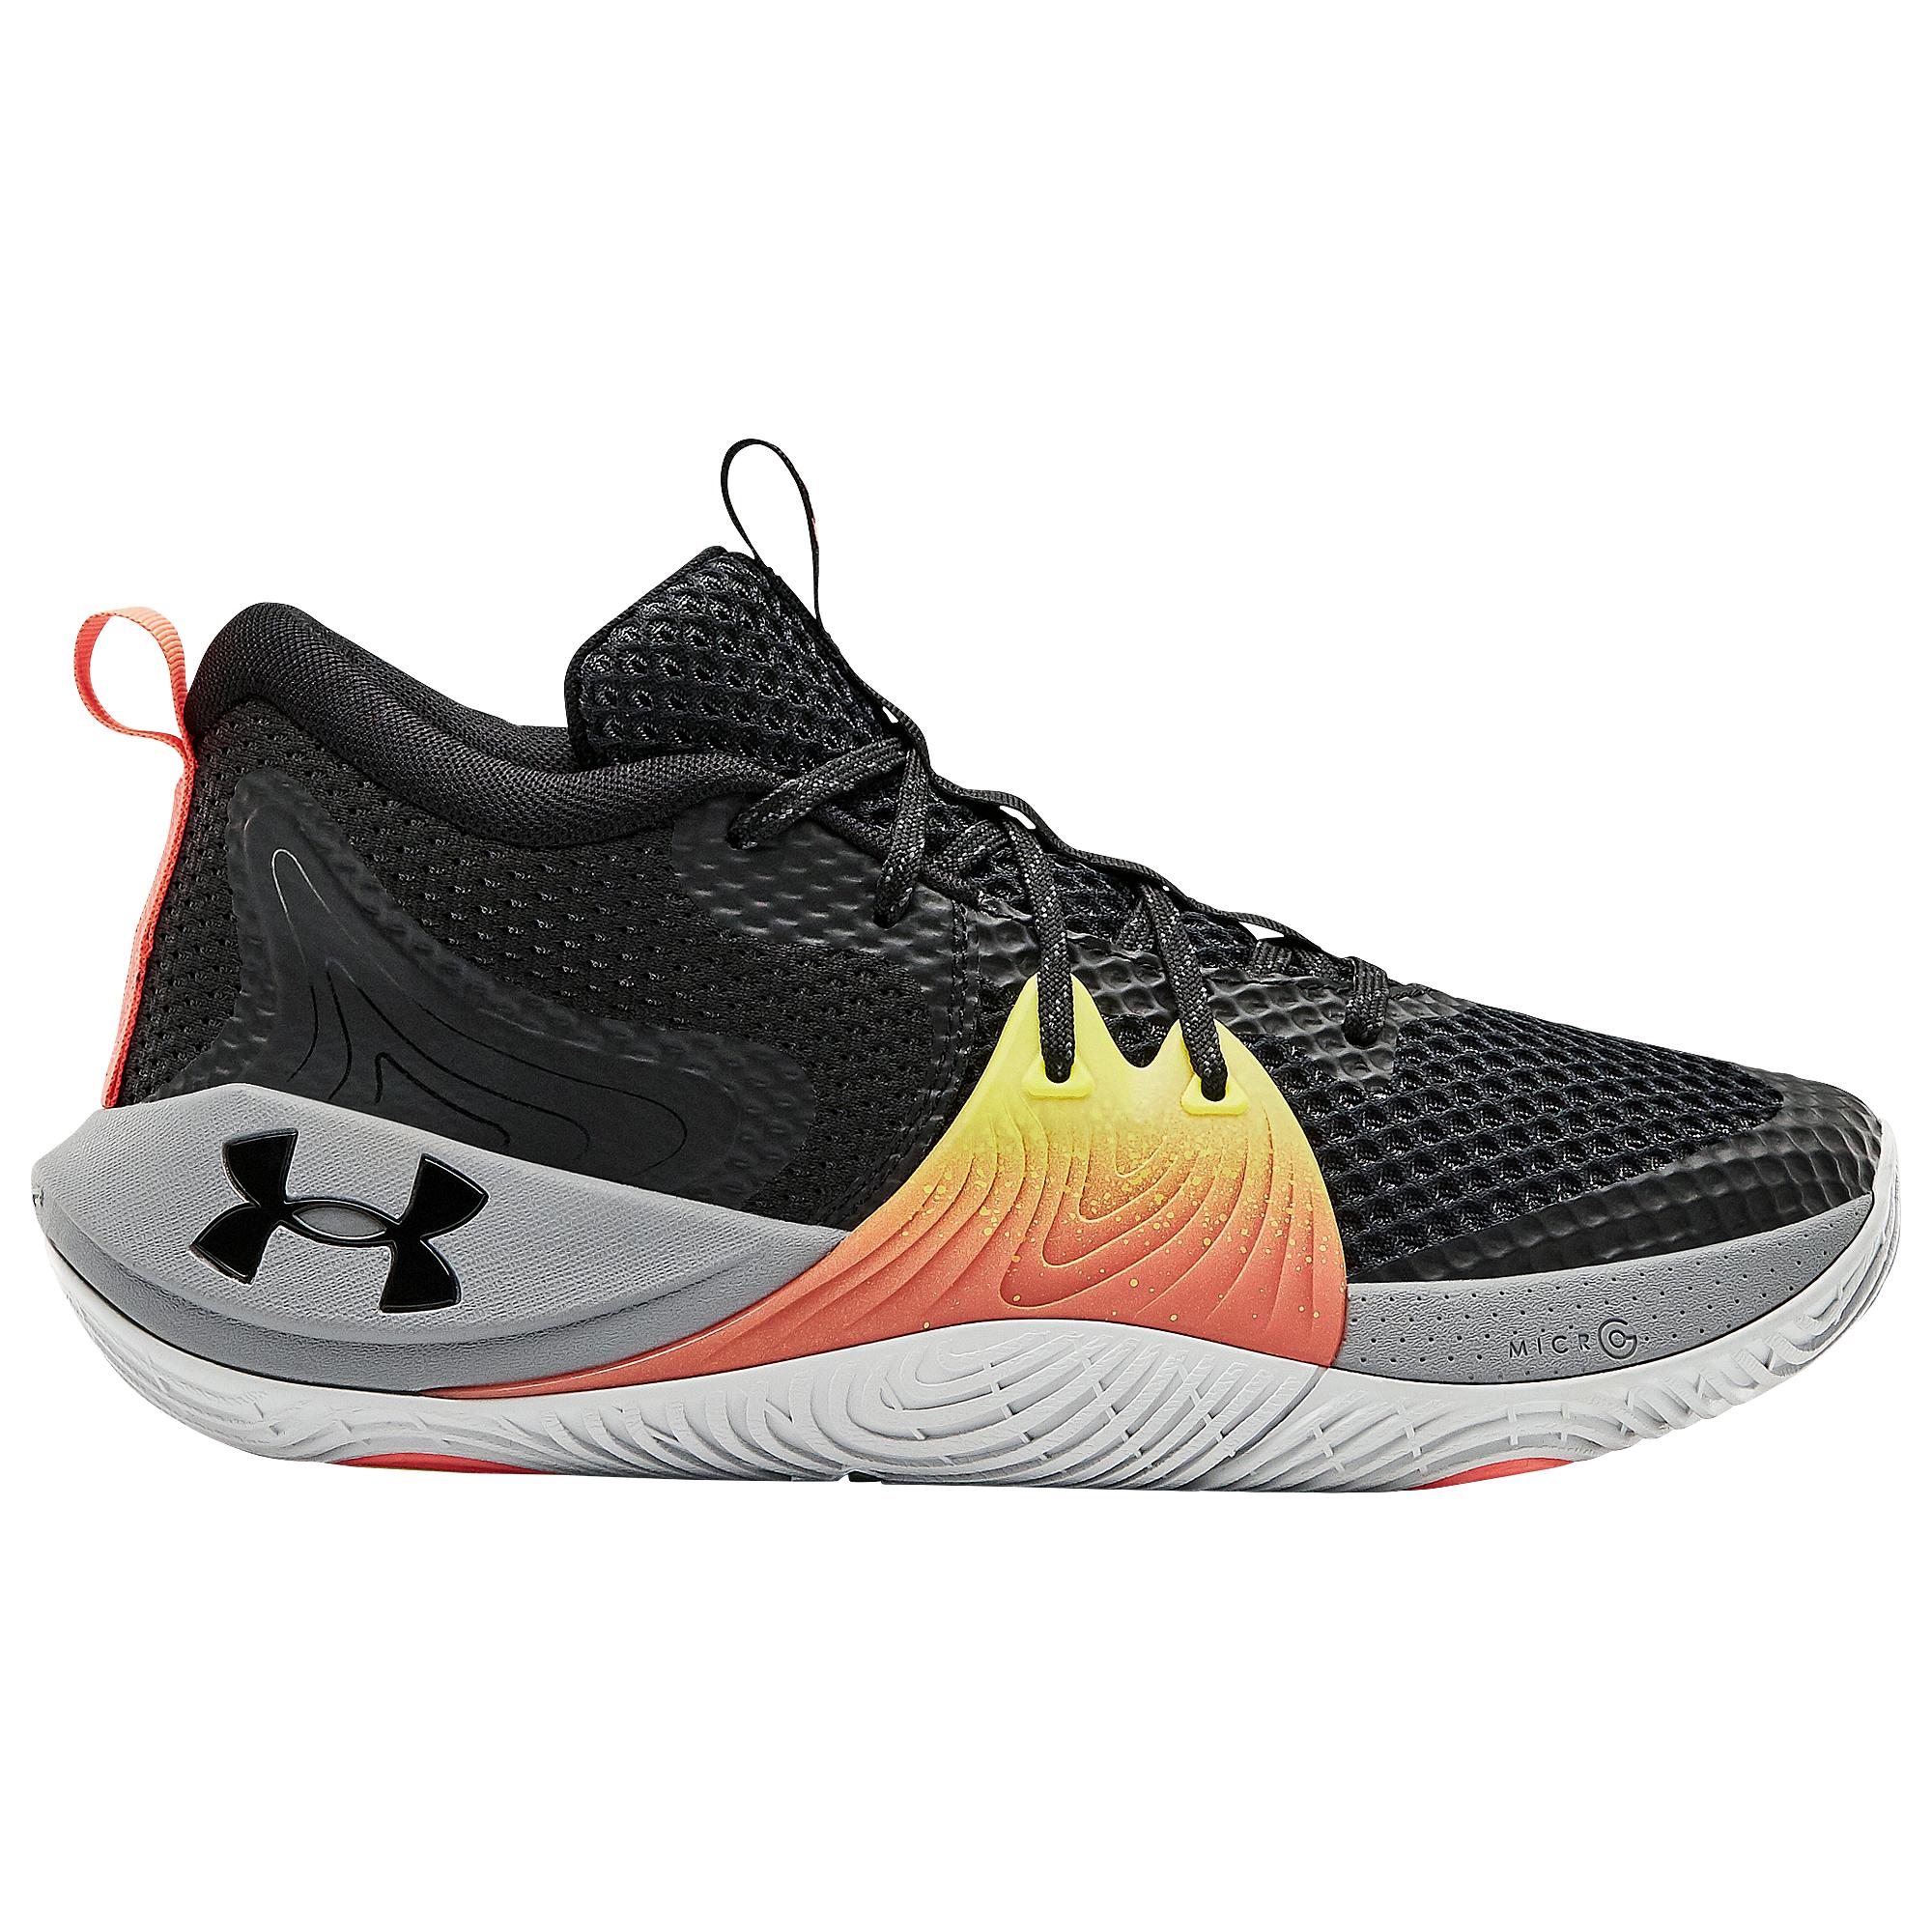 Under Armour Joel Embiid Embiid One Basketball Shoes in